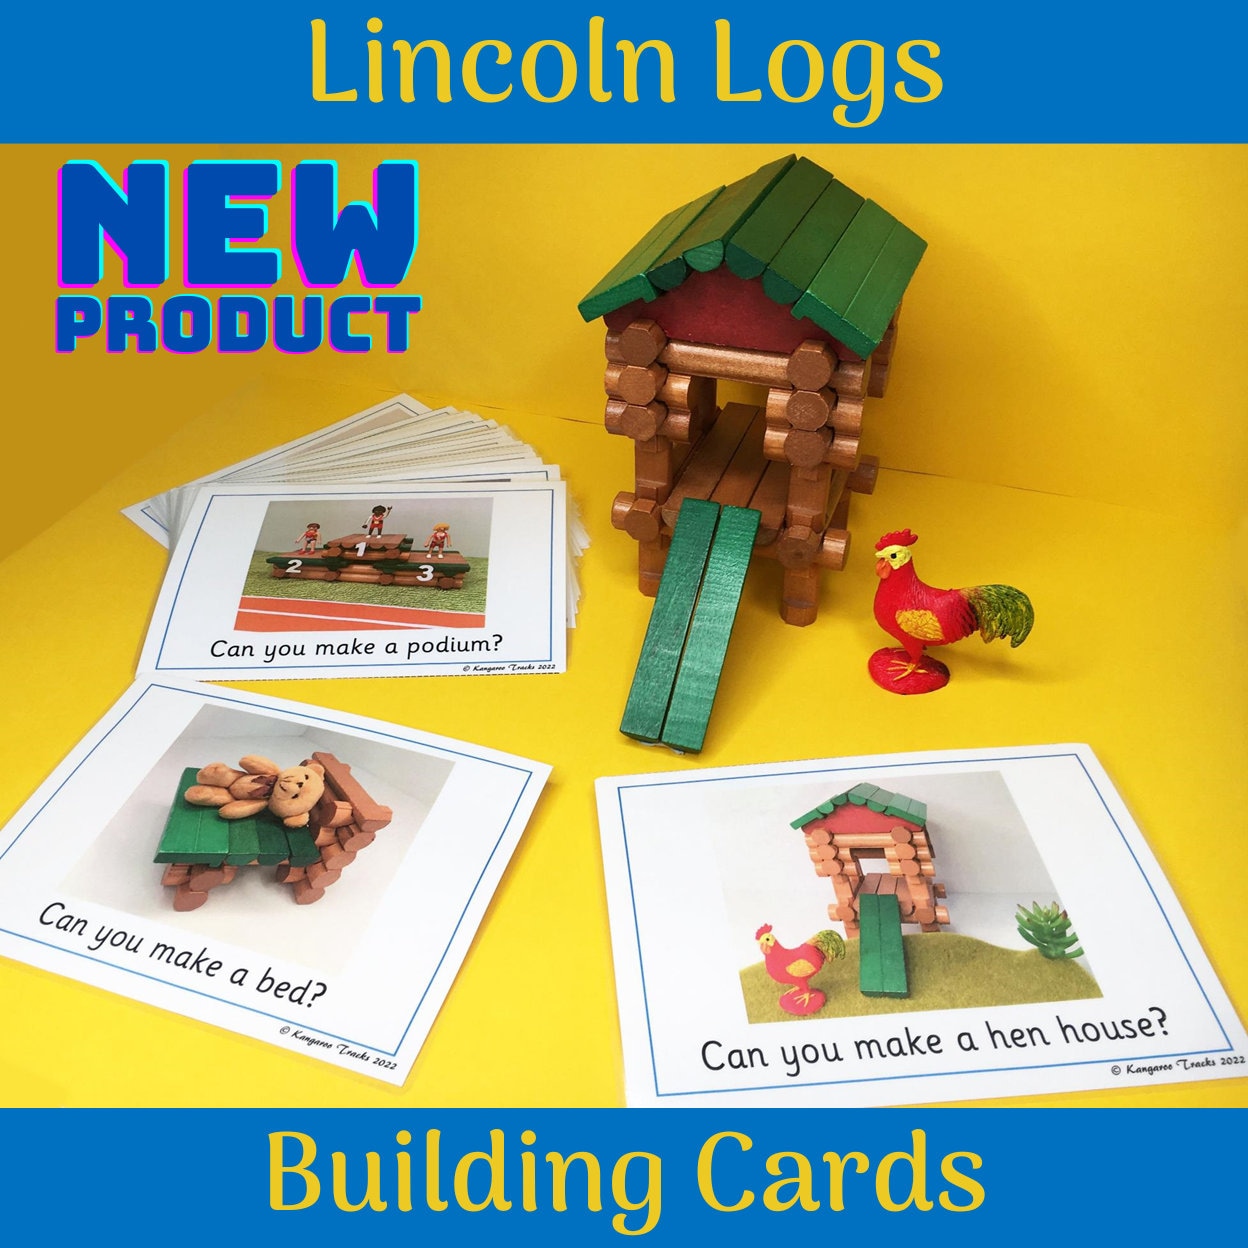 Wooden Blocks & Wooden Logs Construction Challenge Cards to 